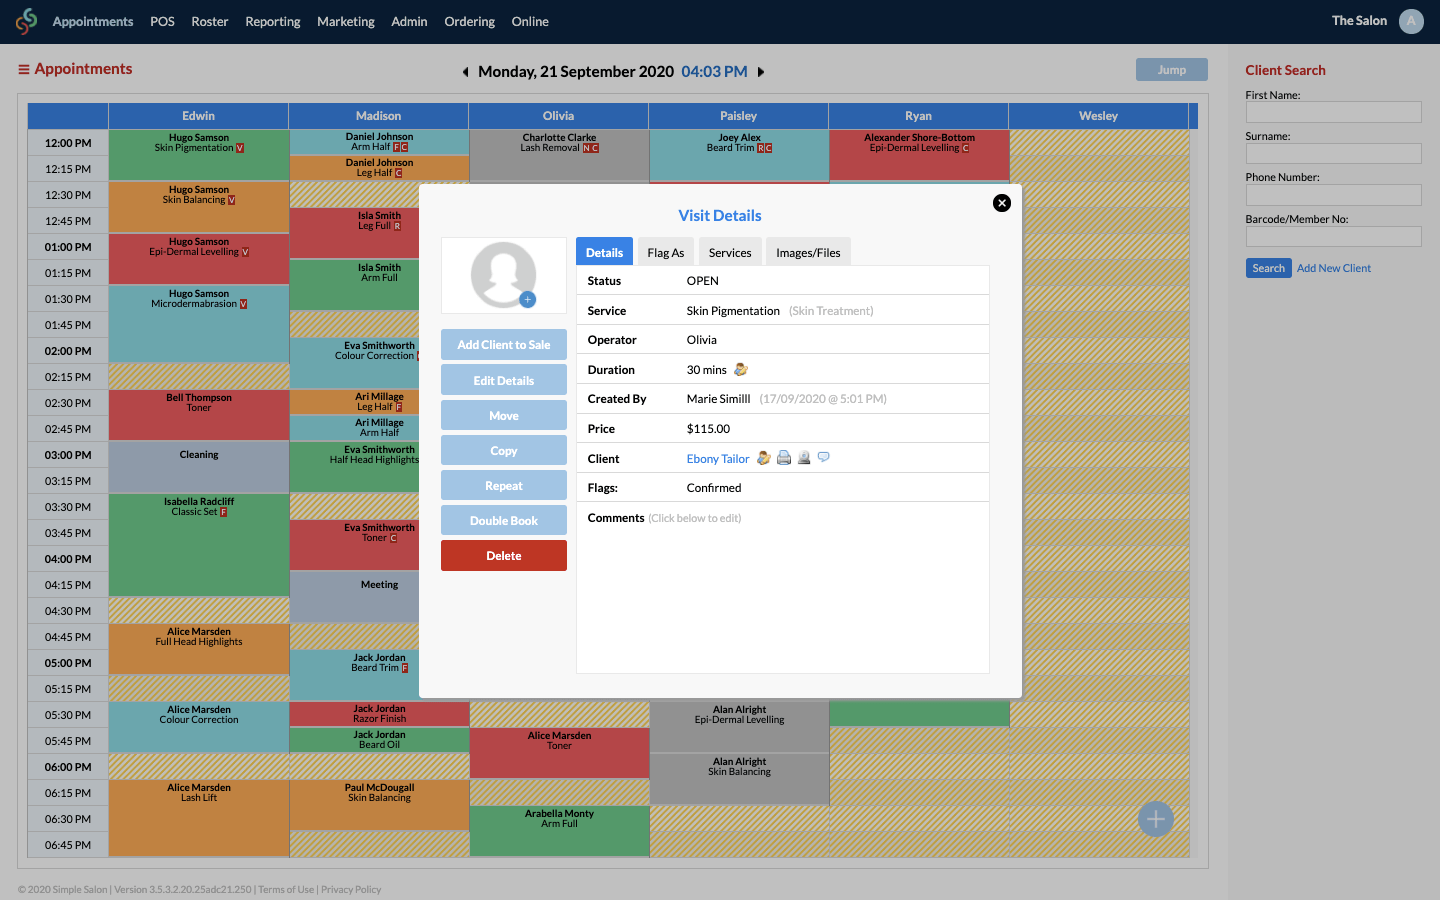 Manage your Appointments - Salon Software Feature